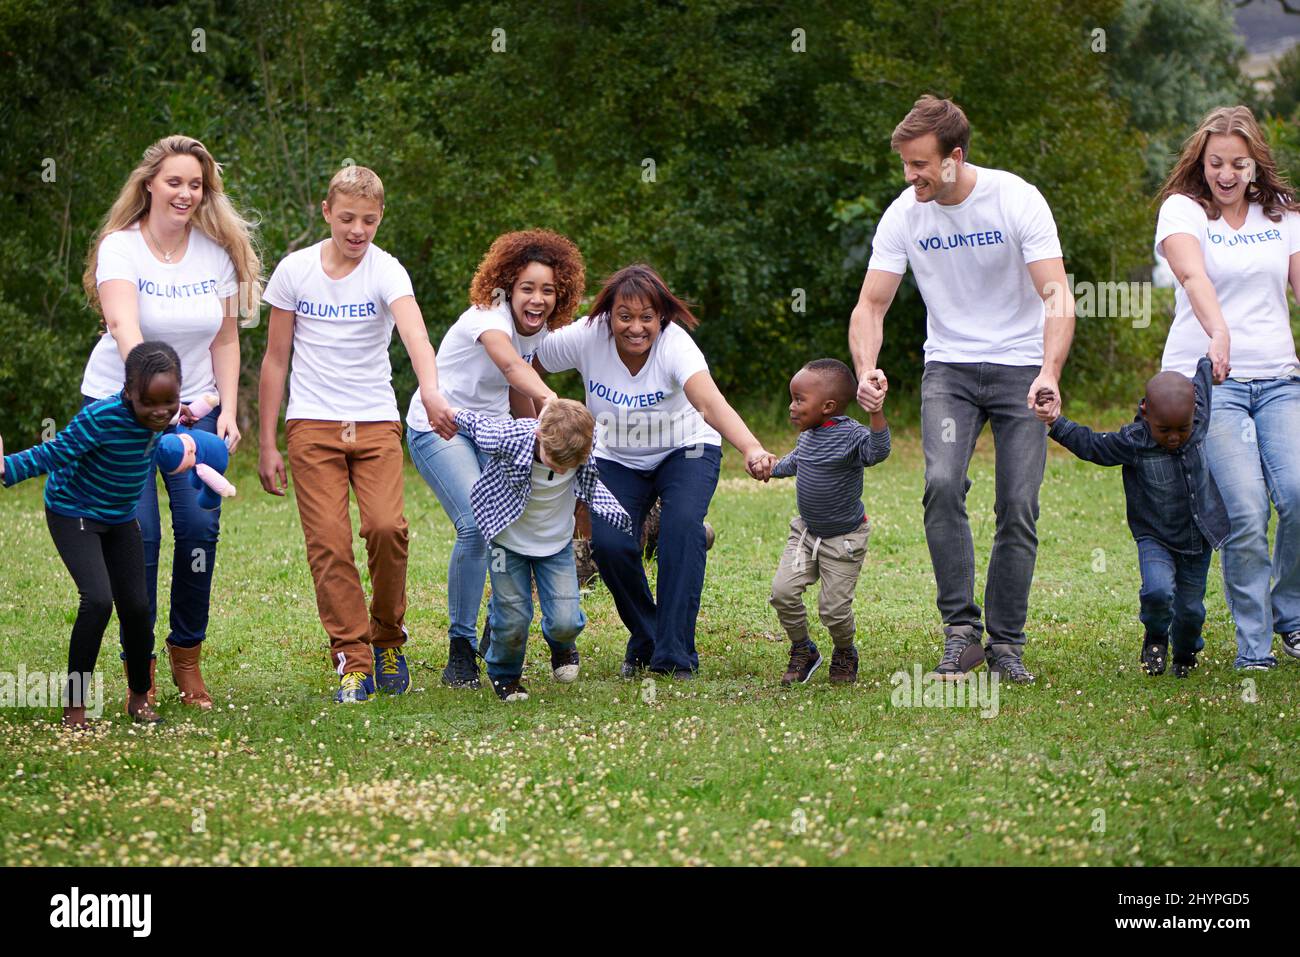 Work for a cause, not applause. Shot of volunteers working with little children. Stock Photo